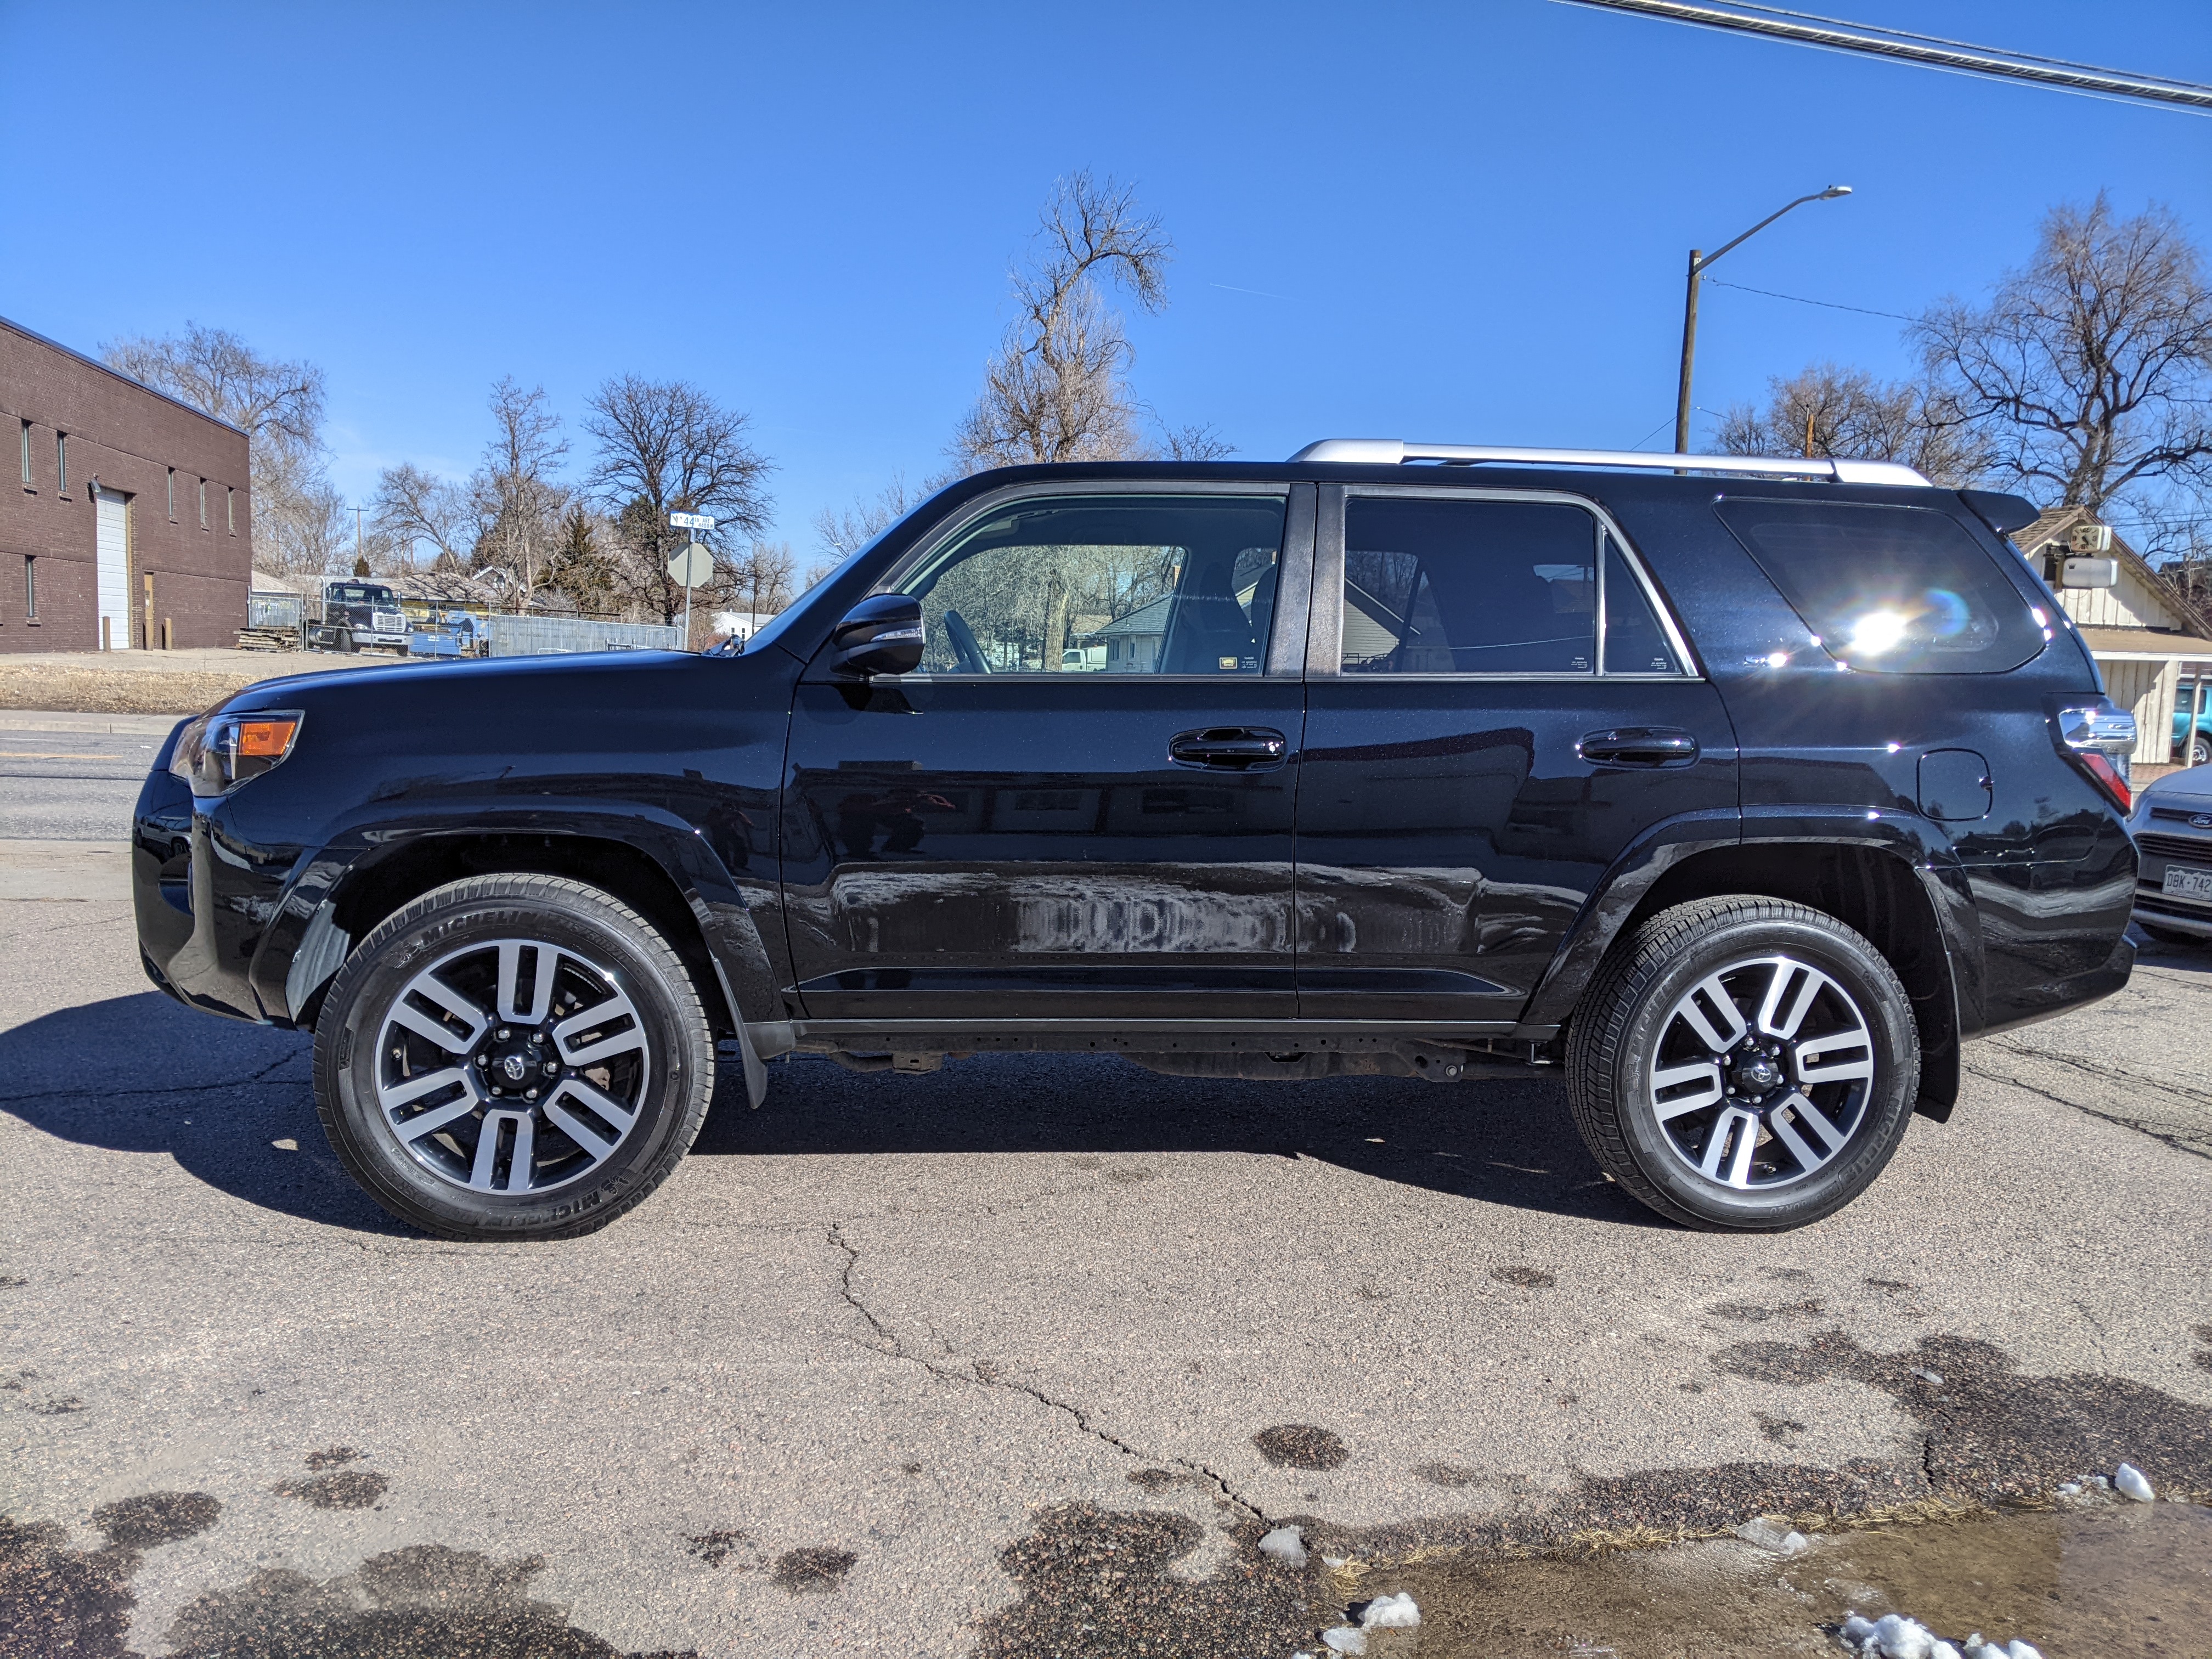 Ceramic coated 2018 Toyota 4Runner SR5 with Ceramic Pro Silver Package.